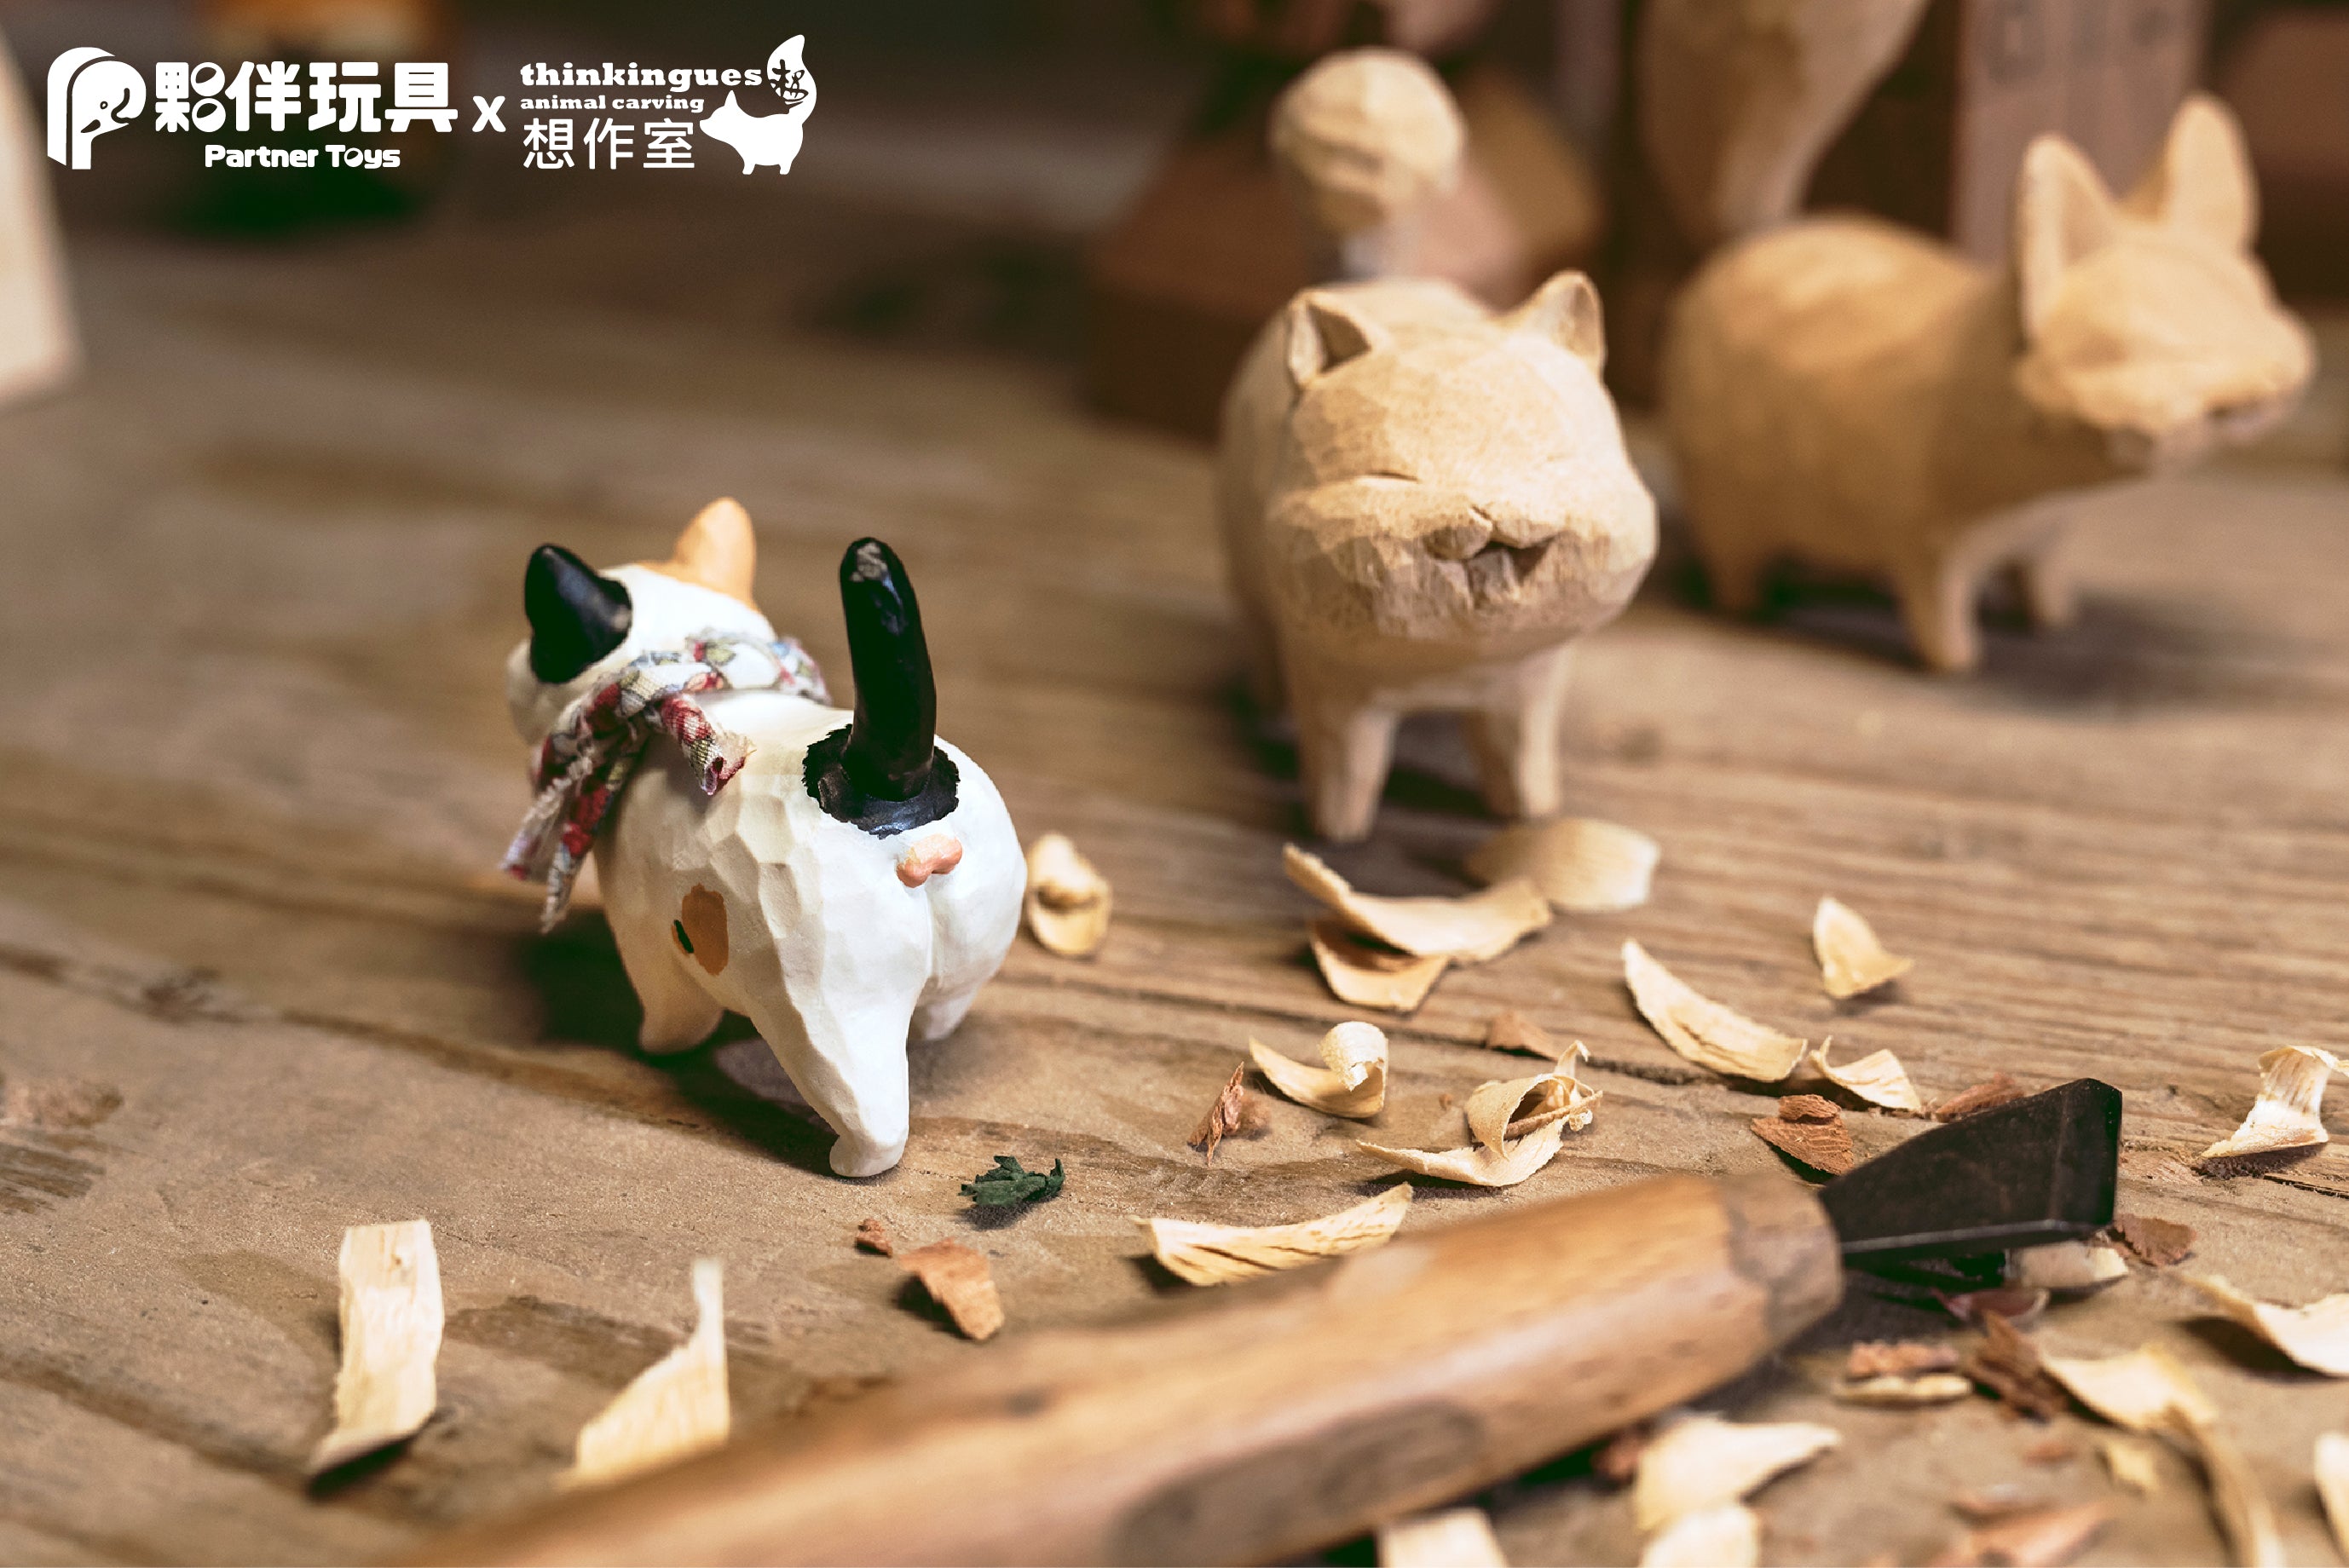 Carving Zoo Gacha Series by Thinkingues Animal Carving